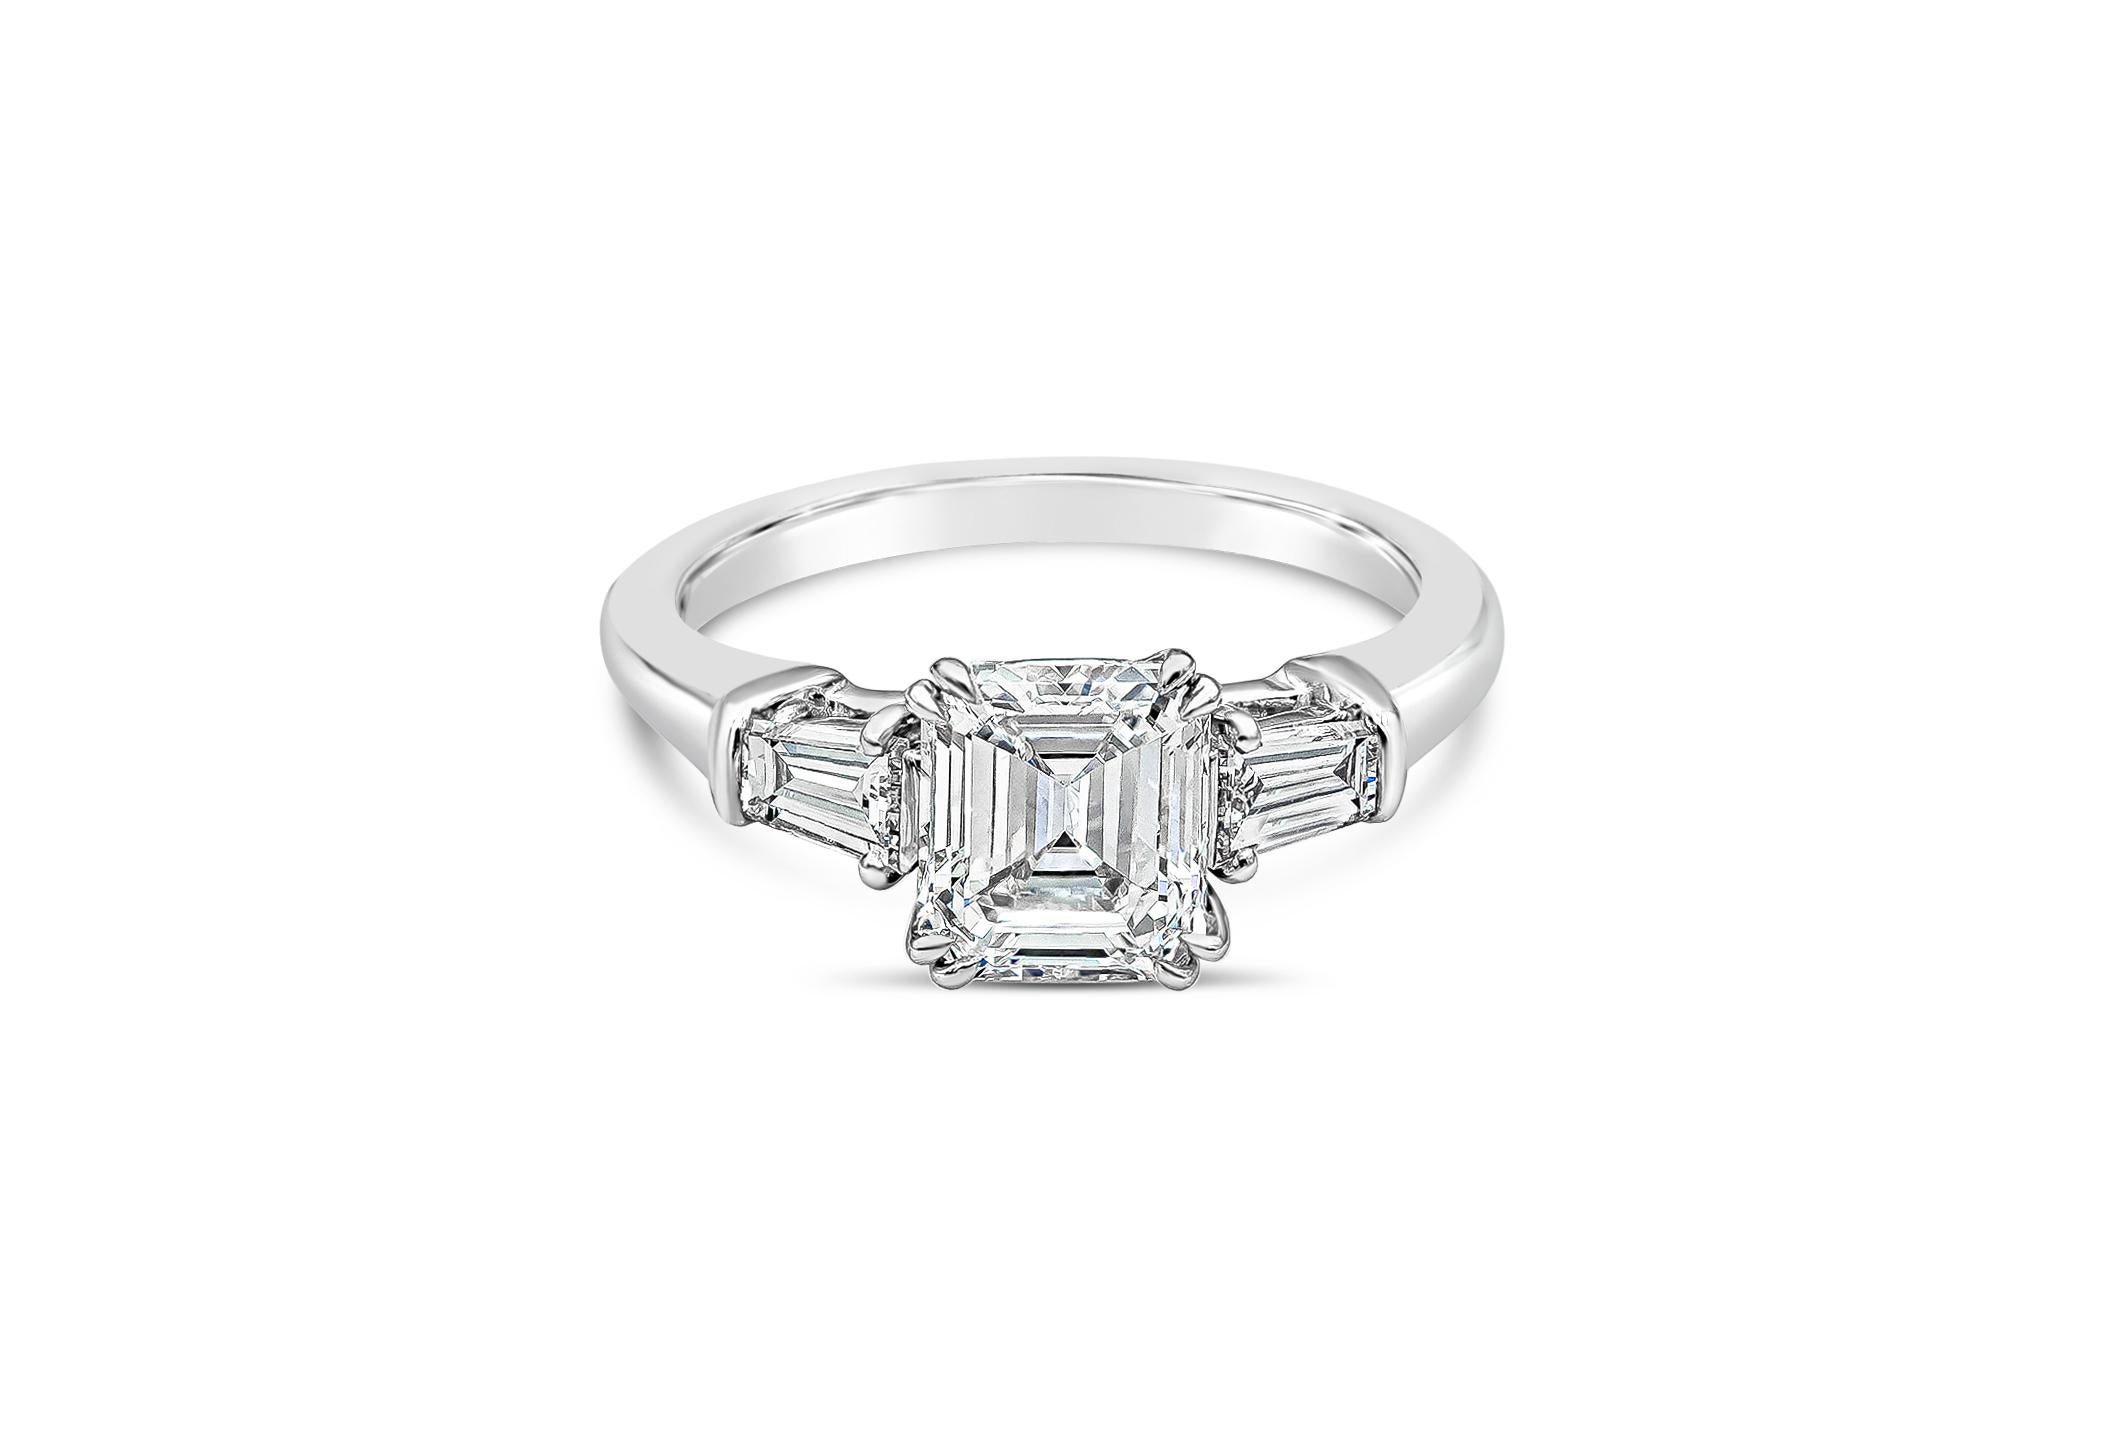 A classic and timeless engagement ring style from world-renowned jeweler, Harry Winston. Showcasing a 1.11 carat emerald cut diamond set in double eagle claws. Flanked by tapered baguette diamonds on either side weighing 0.40 carats total. Made in